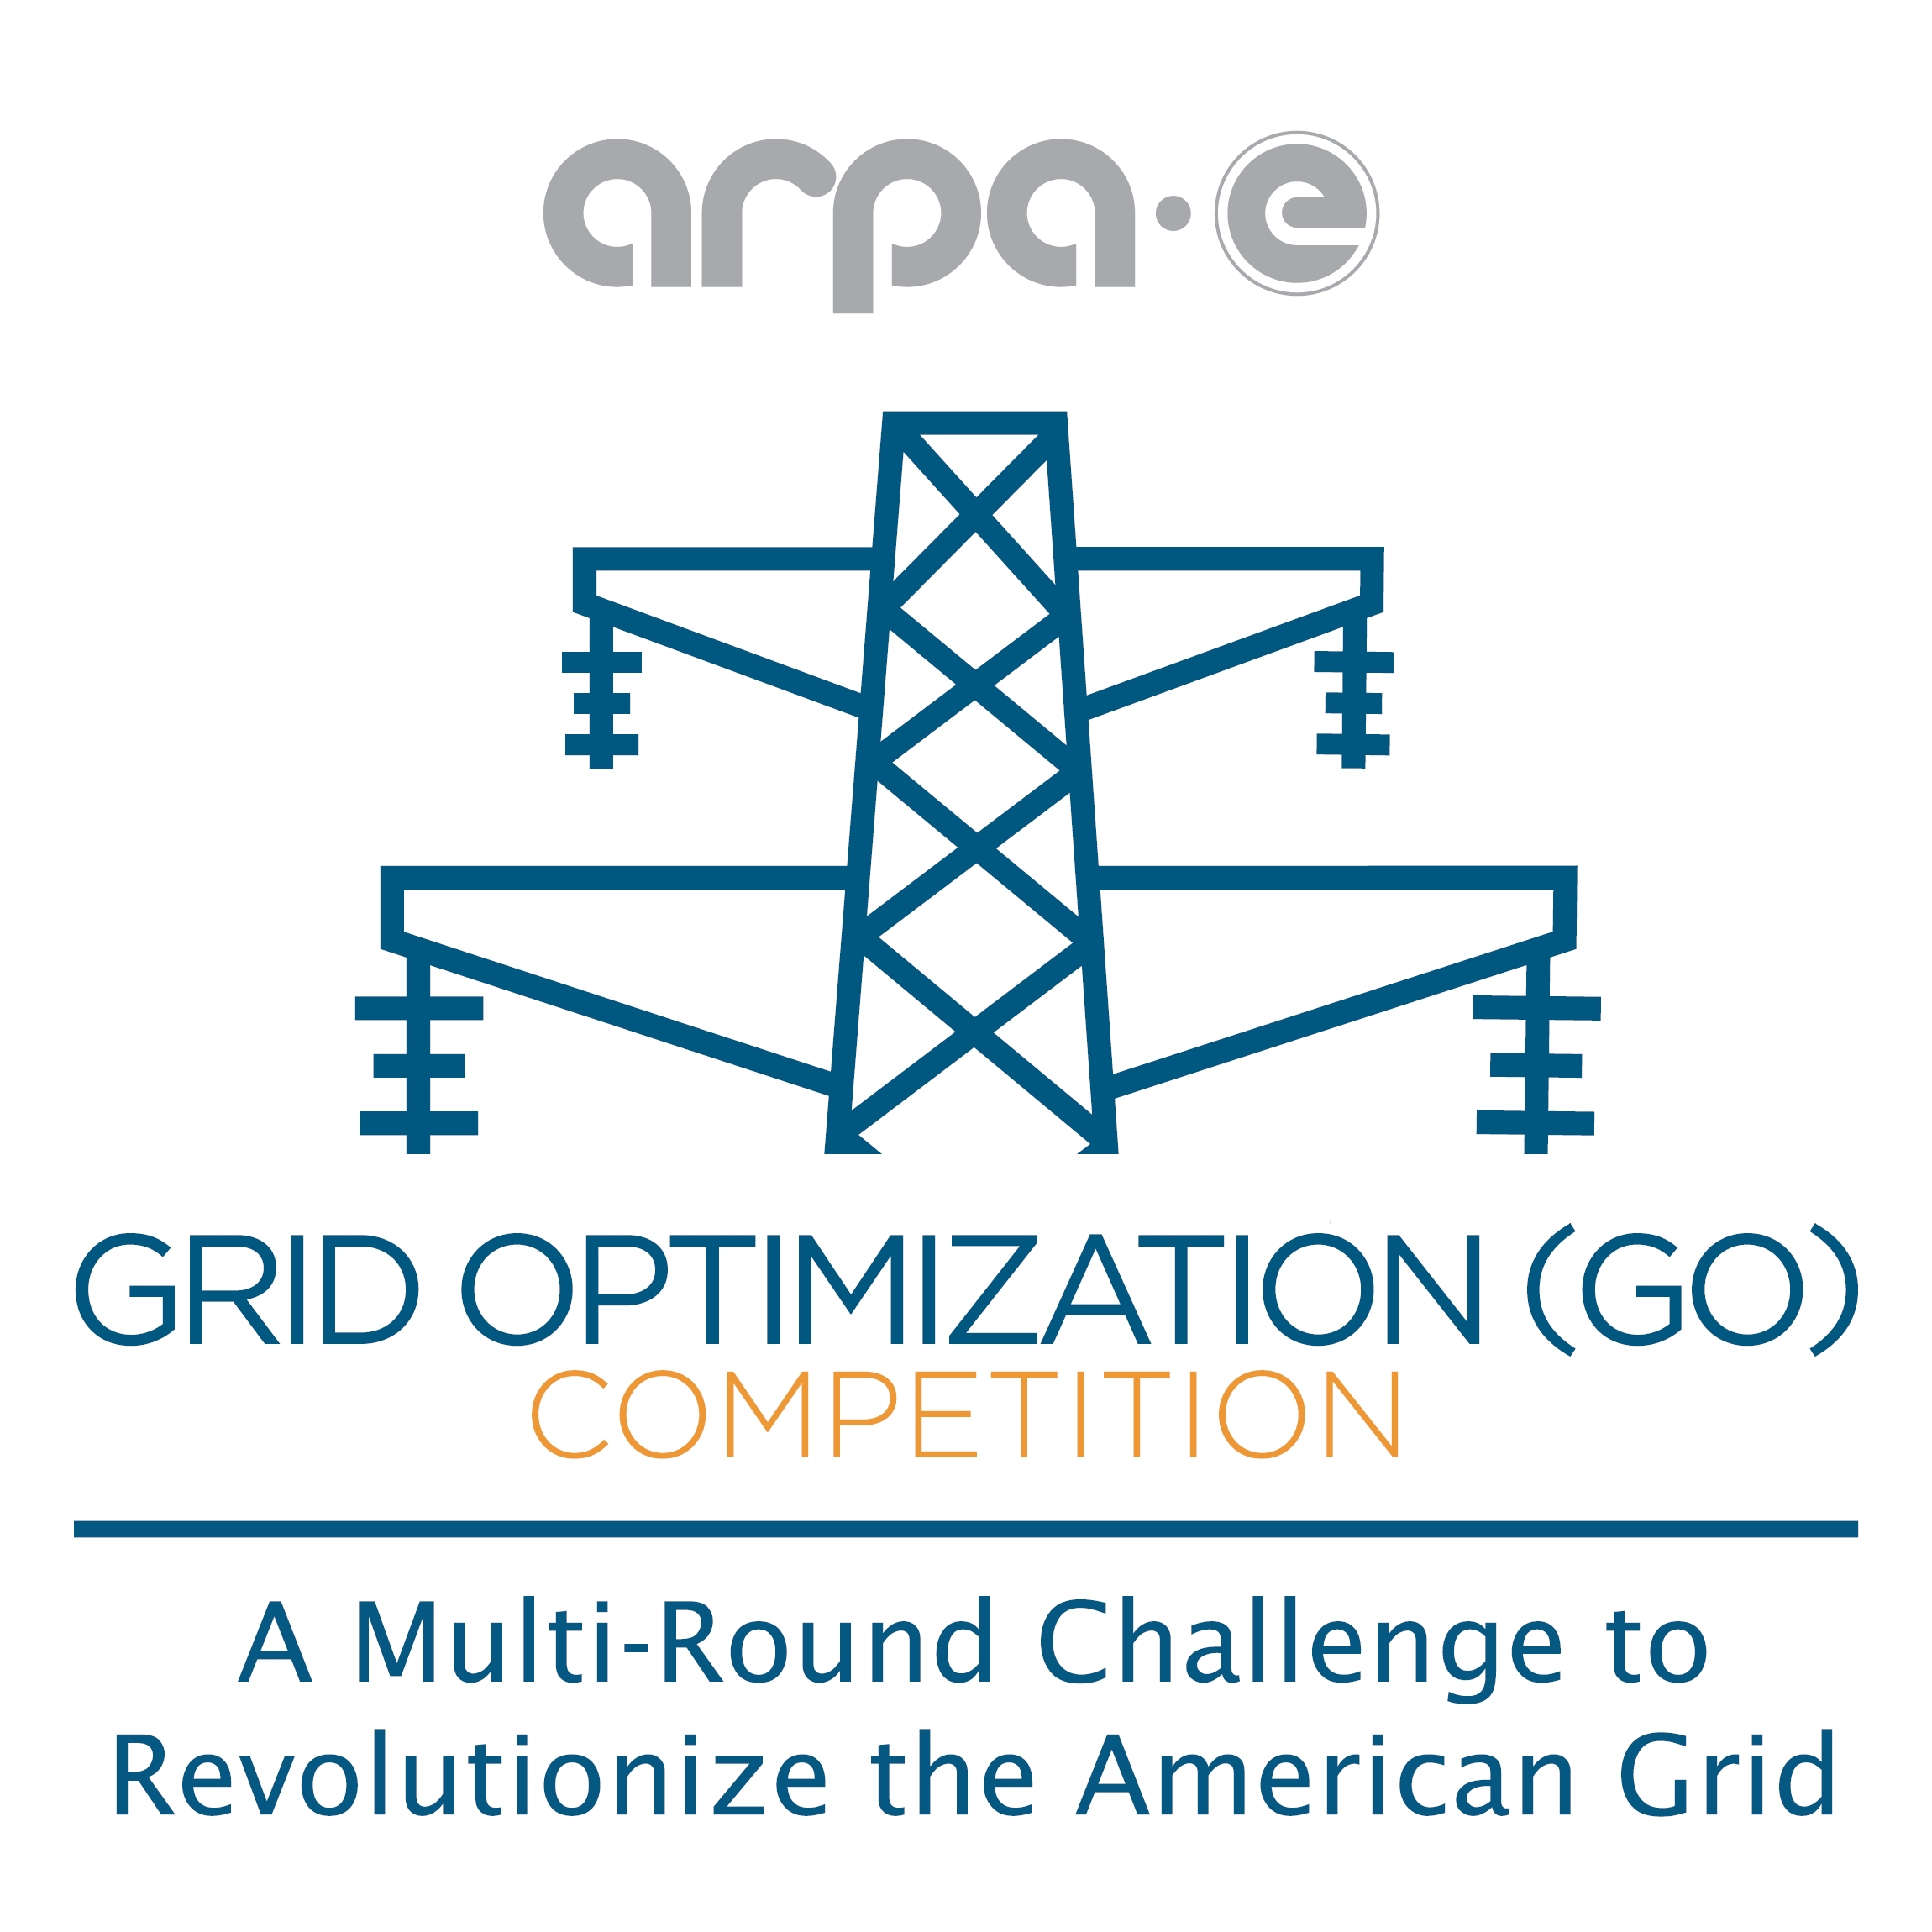 ARPA-E GO Competition Modernizing the Grid